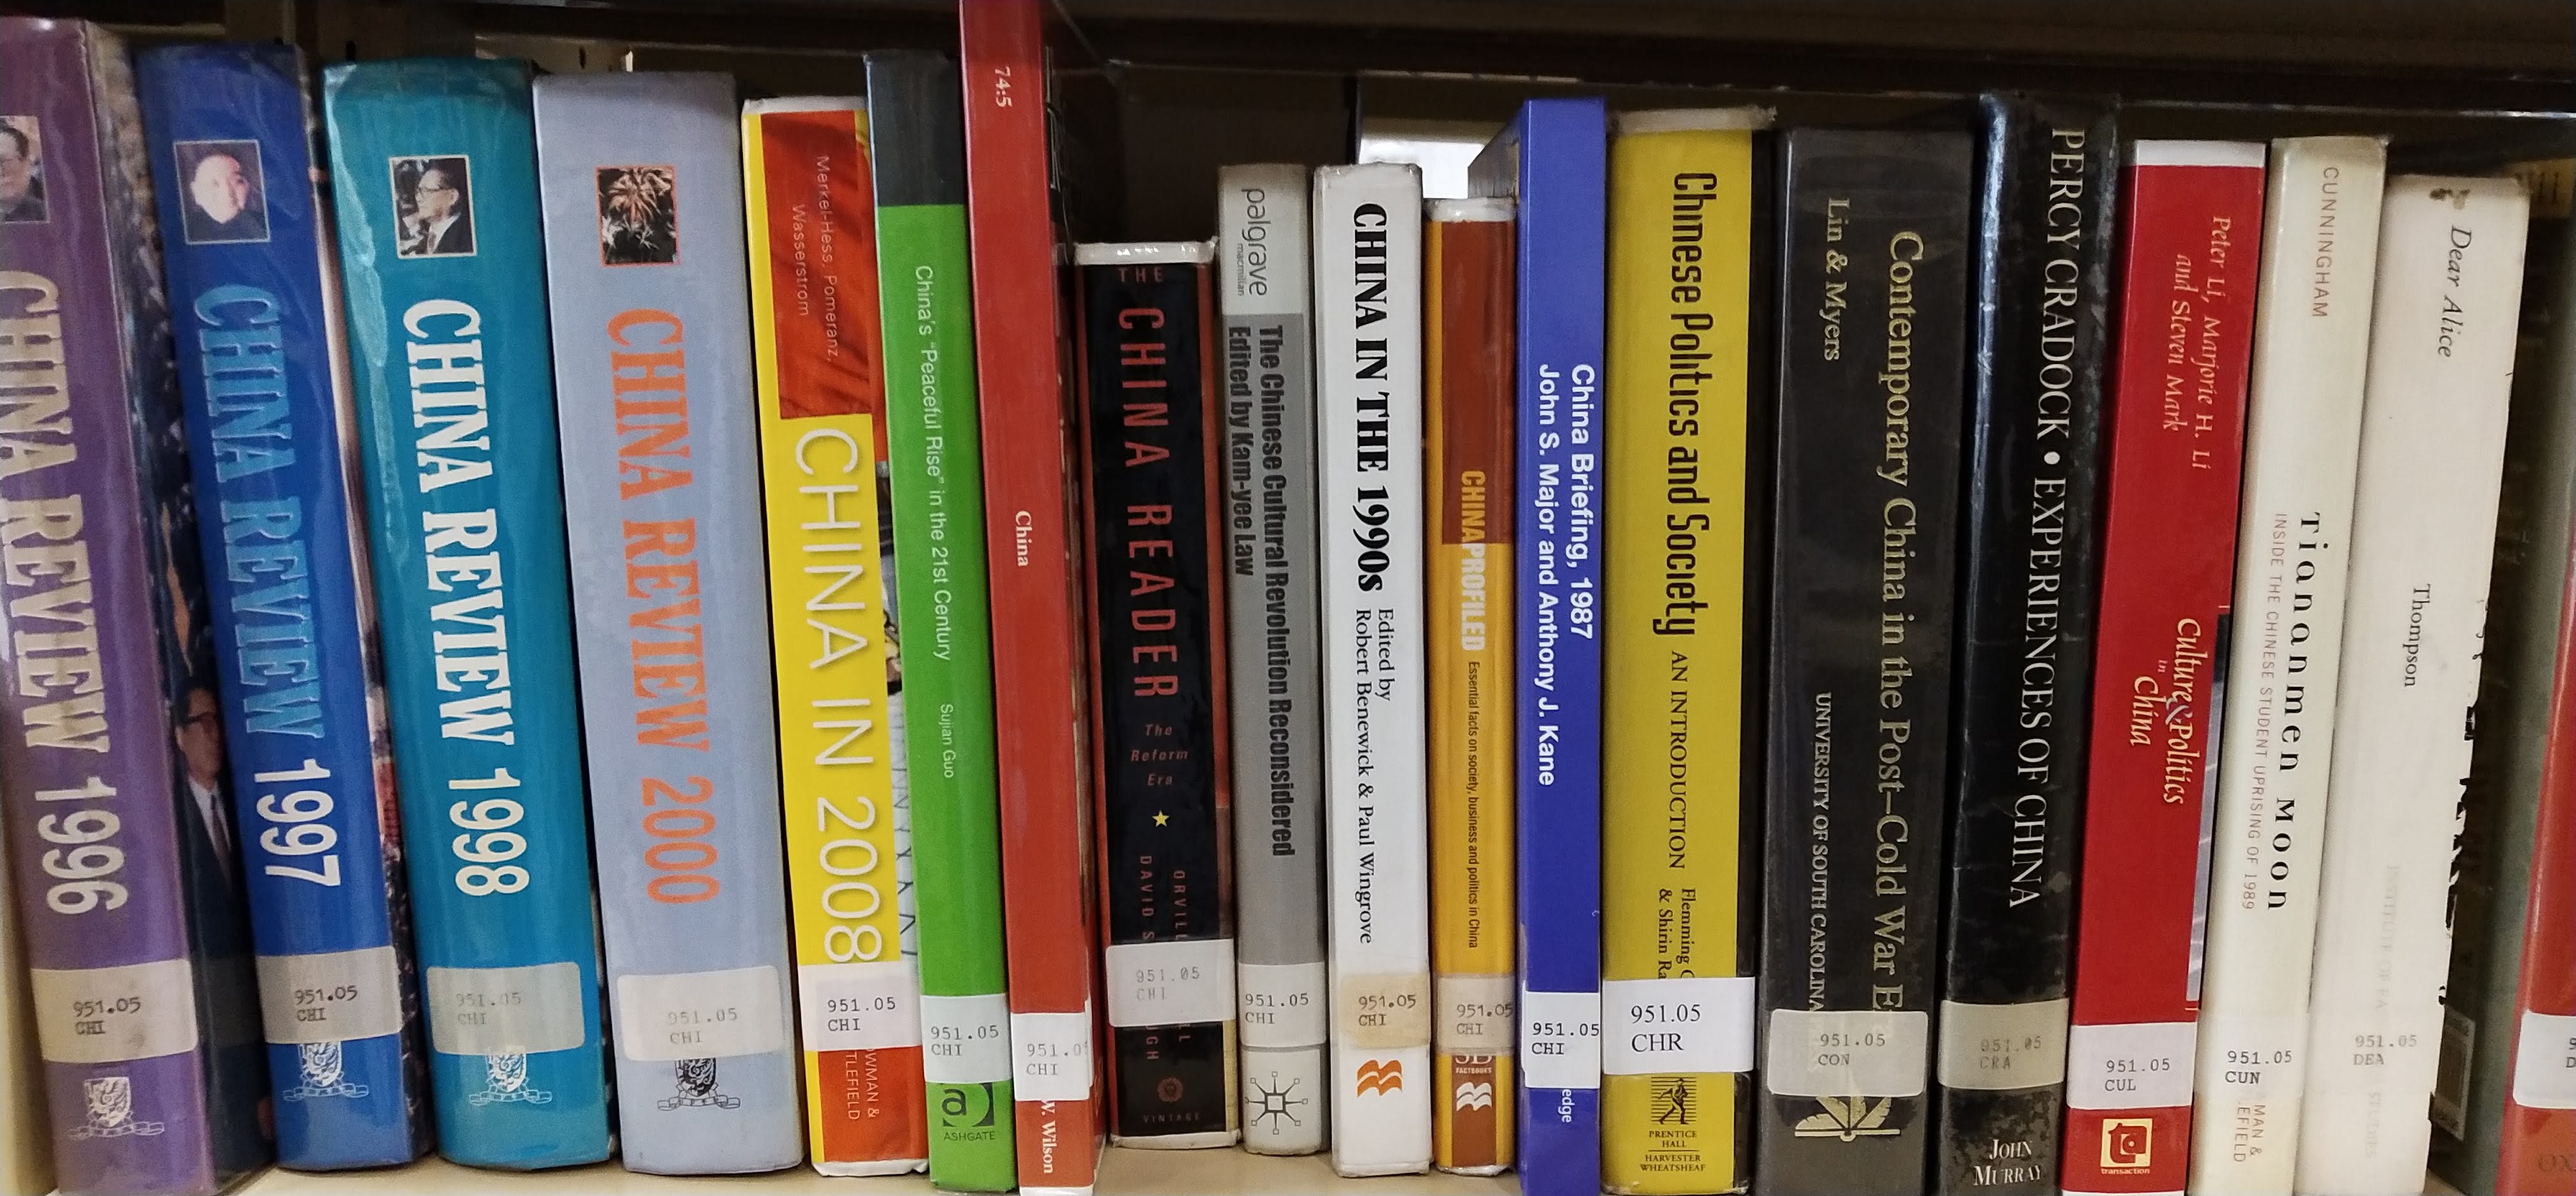 Reference books for China in City Hall Library